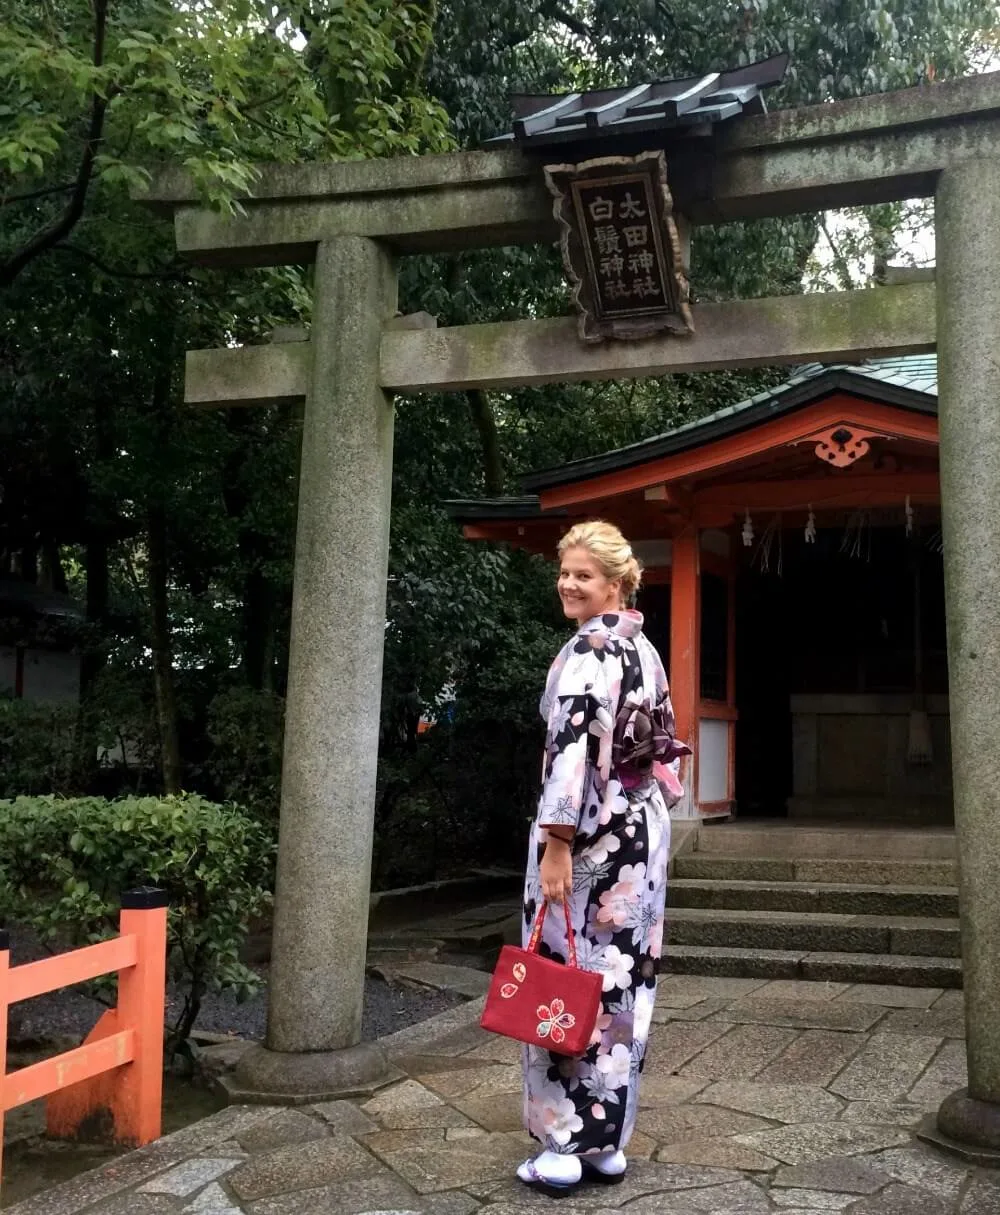 Dressing up as a geisha in Kyoto